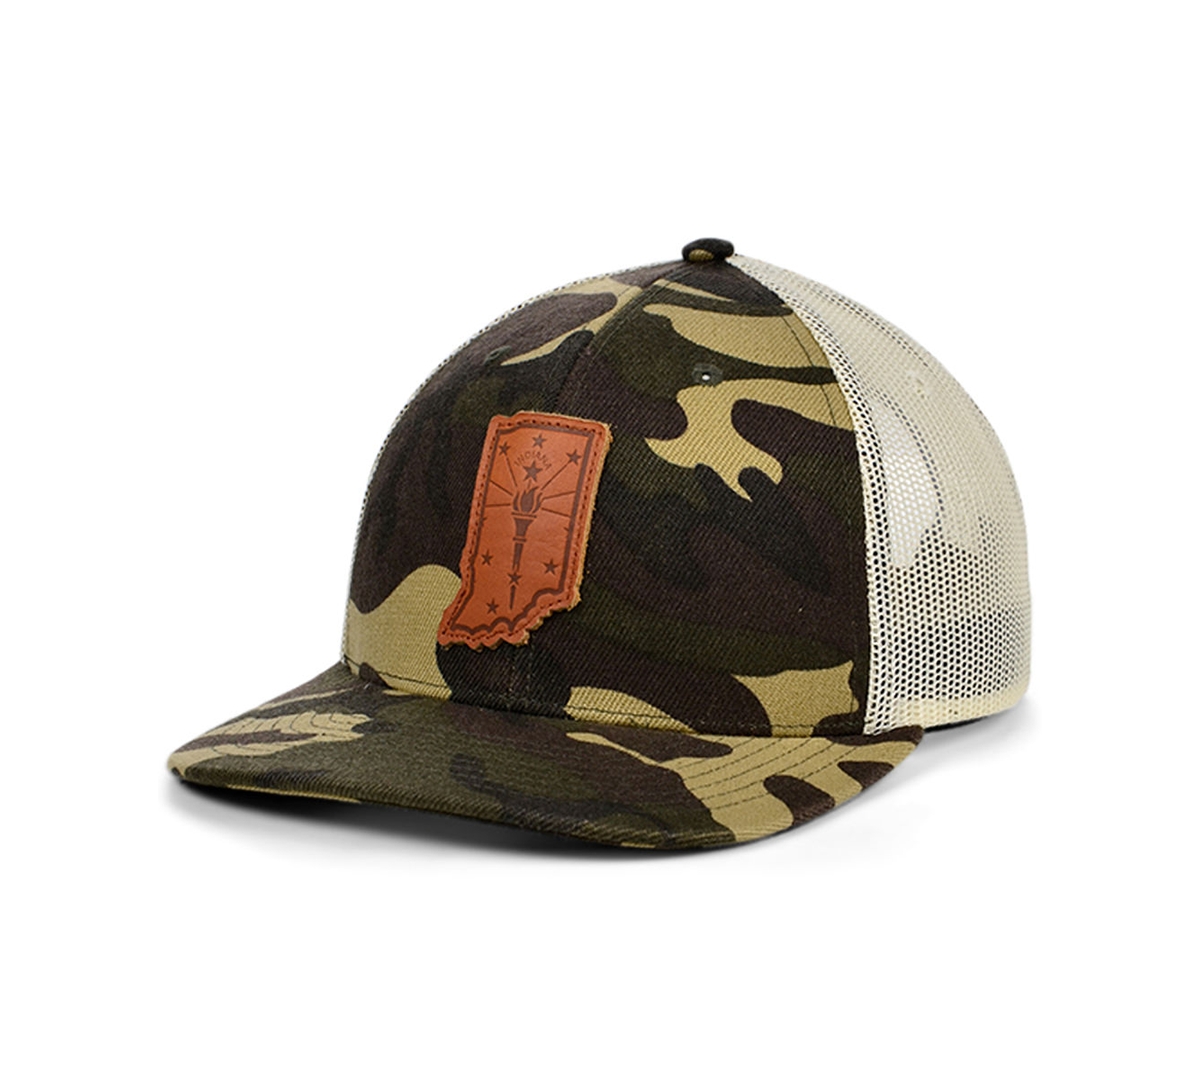 Local Crowns Indiana Woodland State Patch Curved Trucker Cap - WoodlandCamo/Ivory/Brown